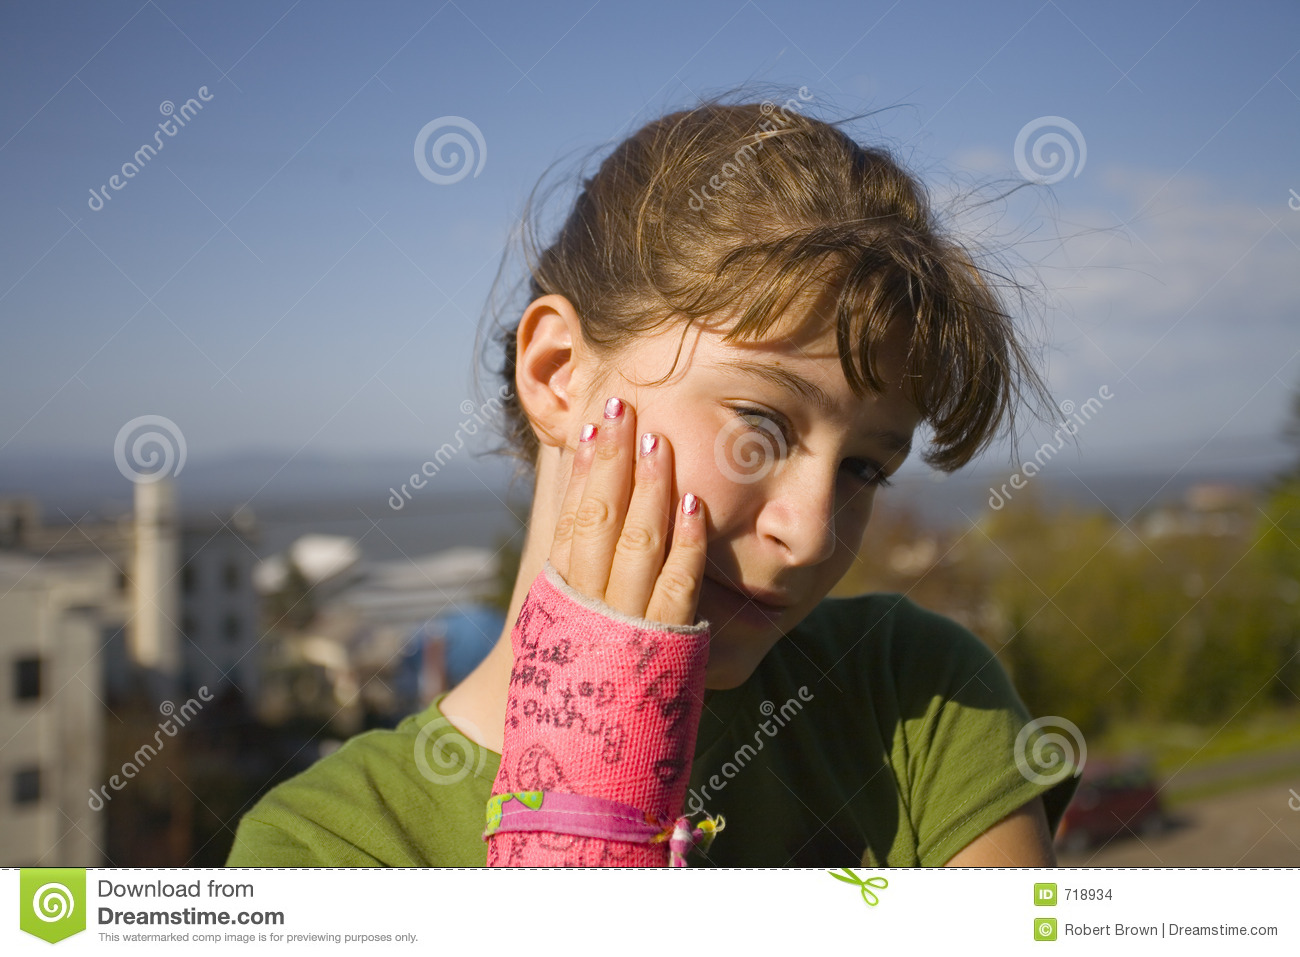     Of Young Girl With Broken Arm In Colorful Plaster Cast Outdoors